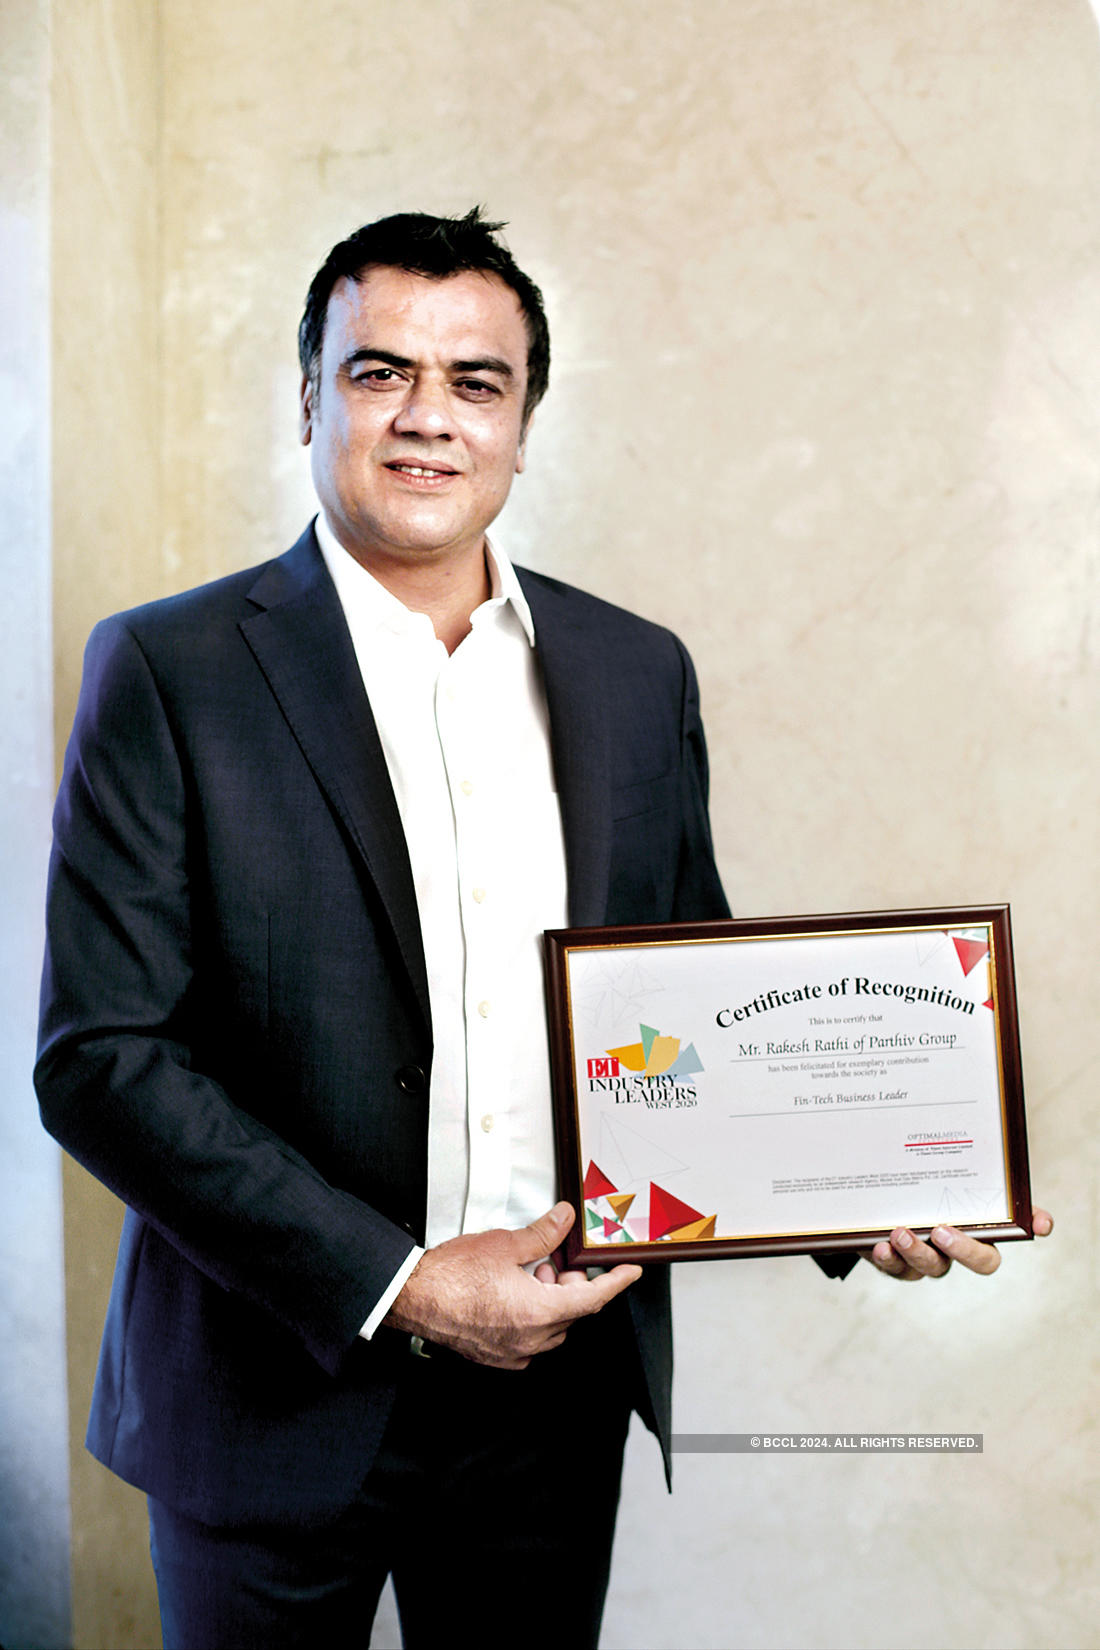 Honouring excellence from all walks of life: ET Industry Leaders– West 2020